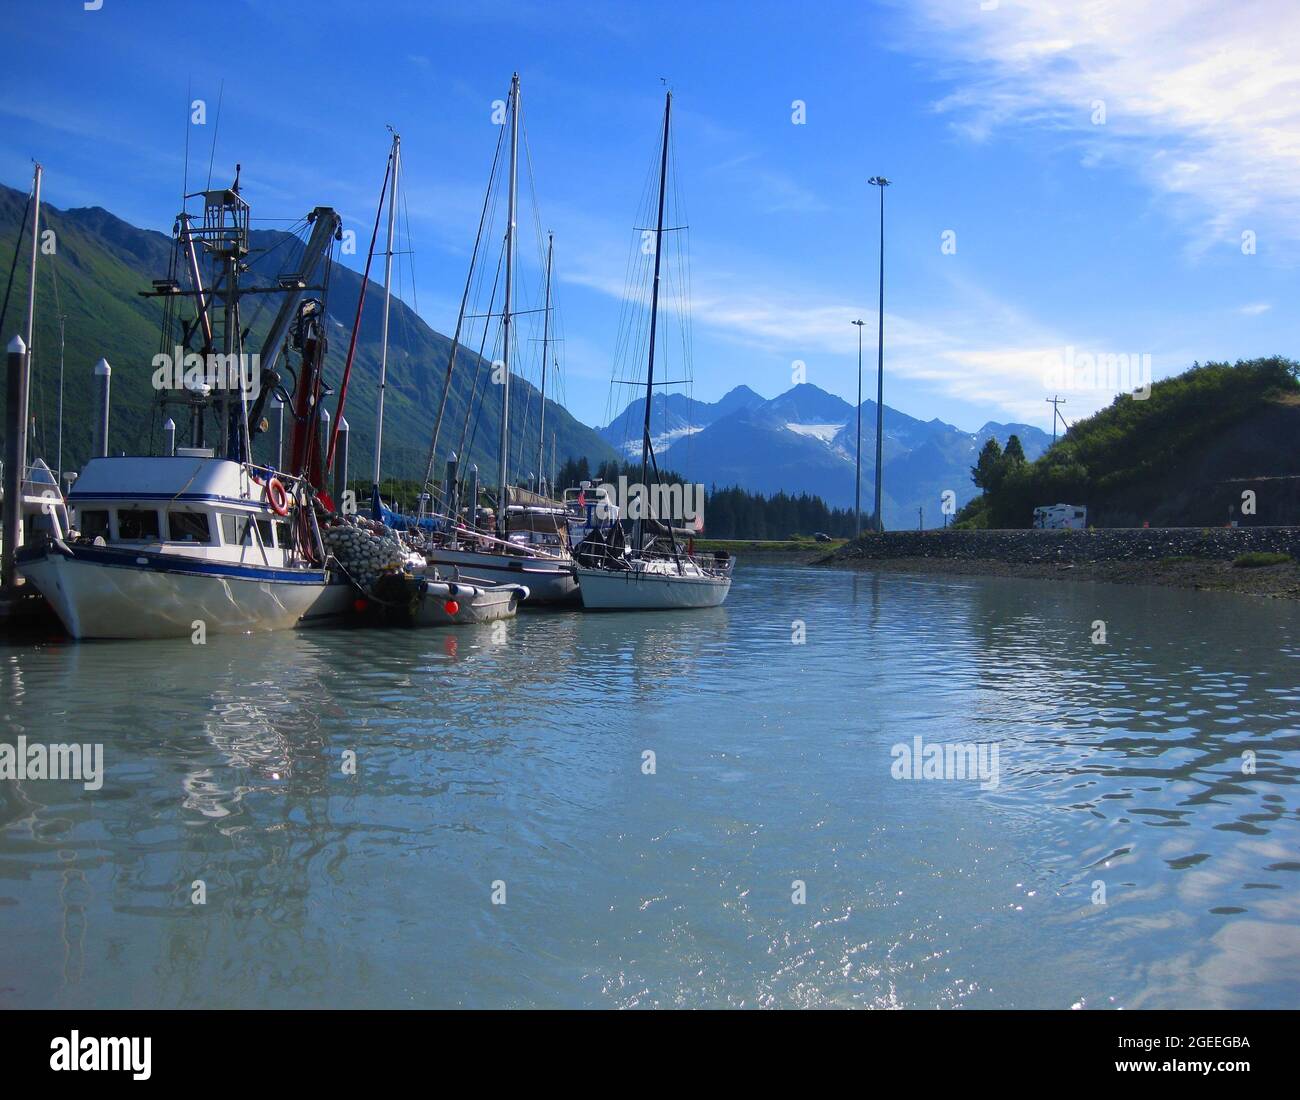 Beautiful mountains tower over the small boat harbor in Valdez, Alaska.  Sailboats and fishing boats cluster together. Stock Photo